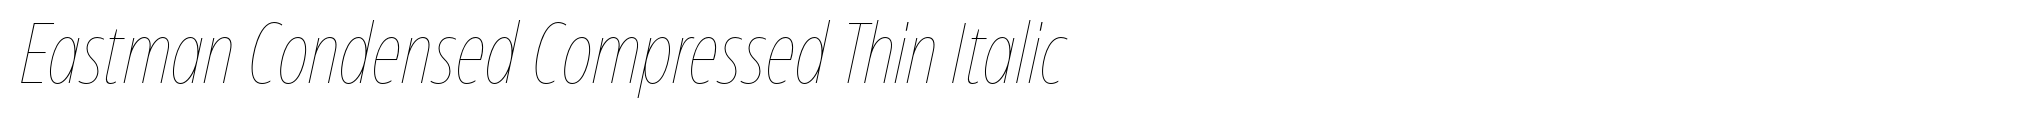 Eastman Condensed Compressed Thin Italic image